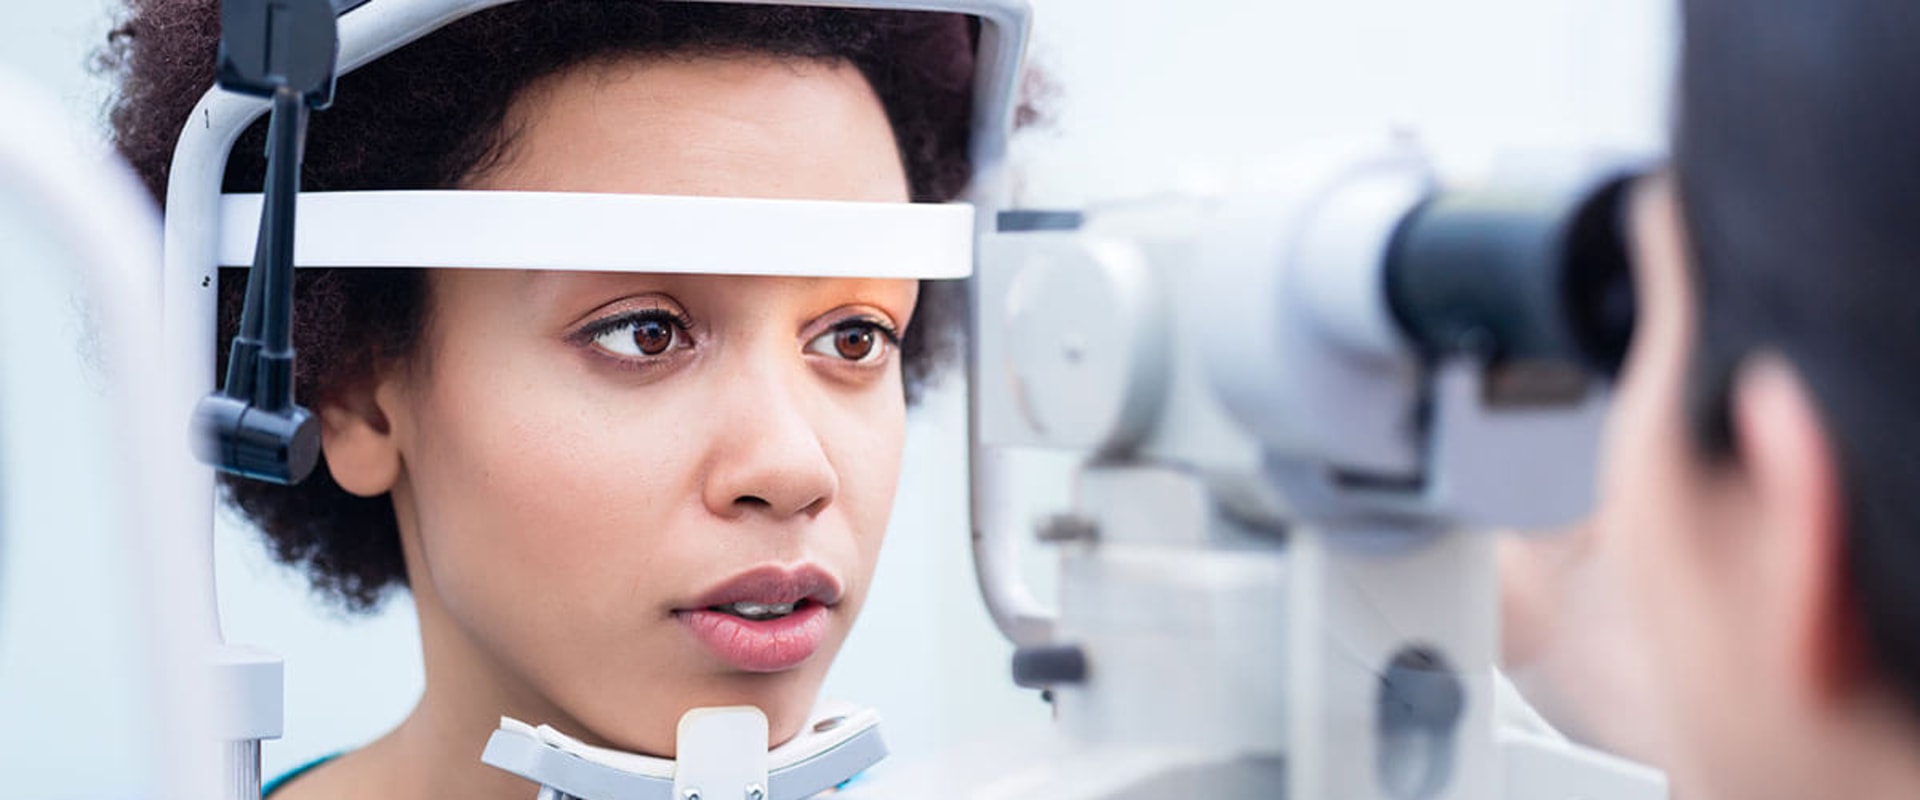 What Not to Do Before an Eye Exam